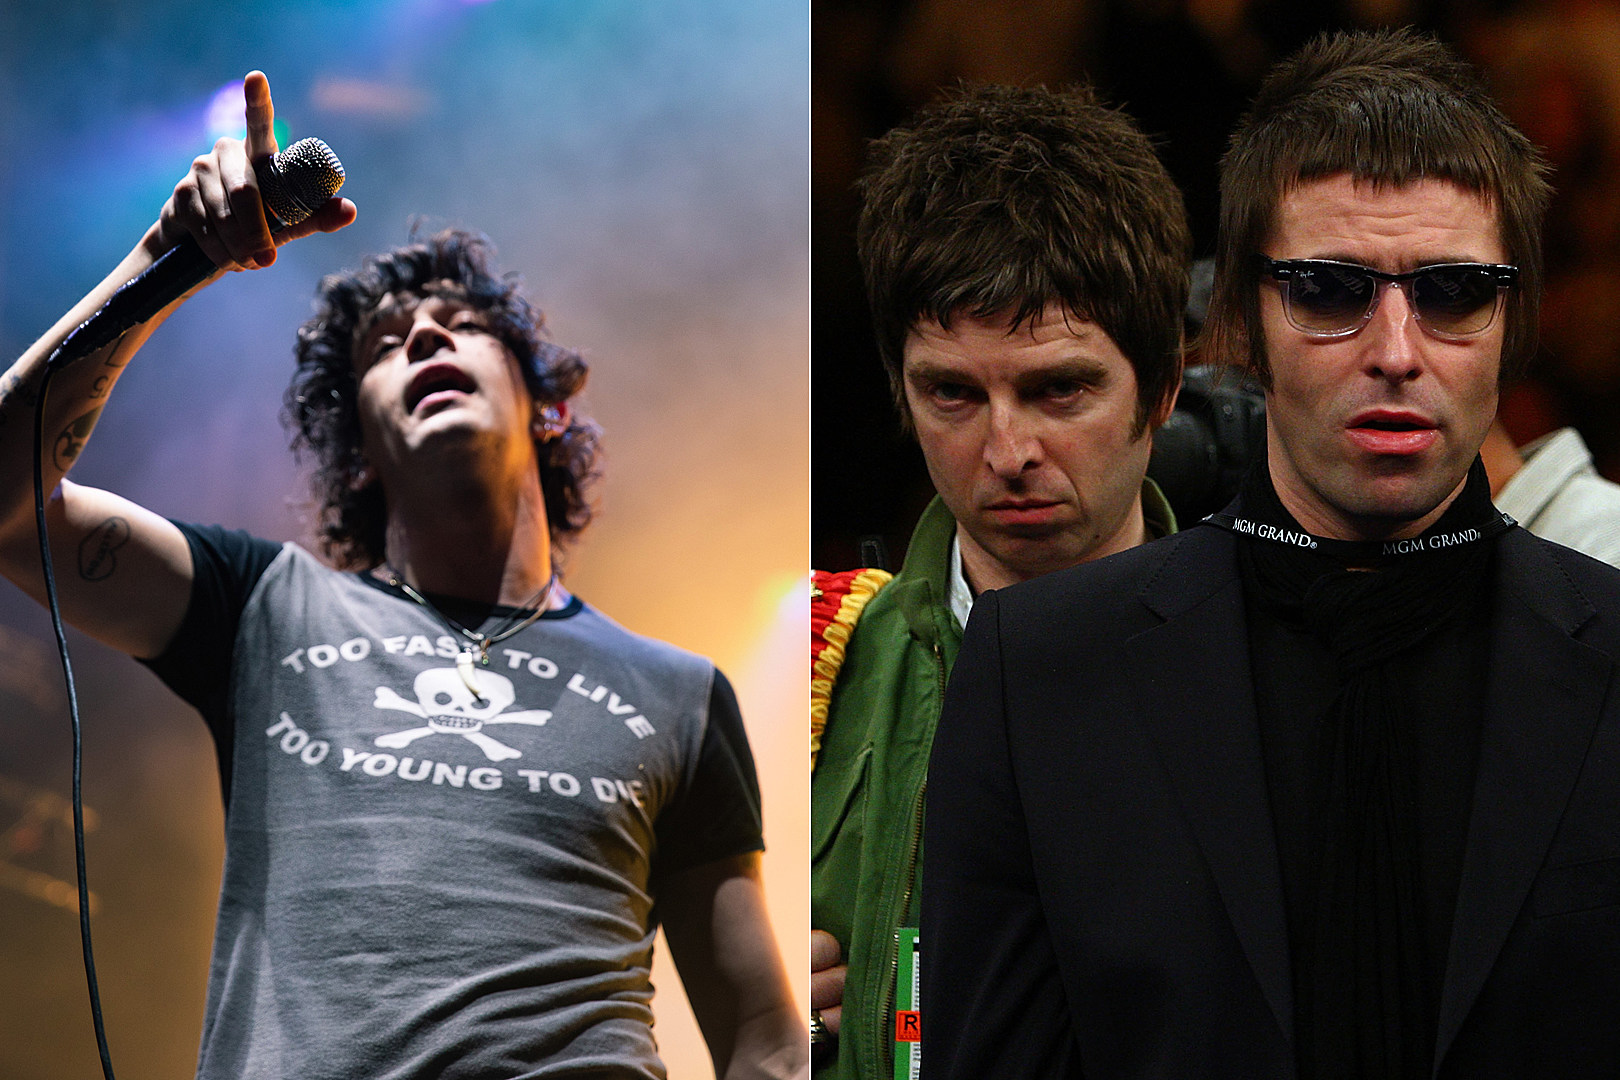 1975’s Matt Healy Challenges Gallagher Brothers to Reunite Oasis